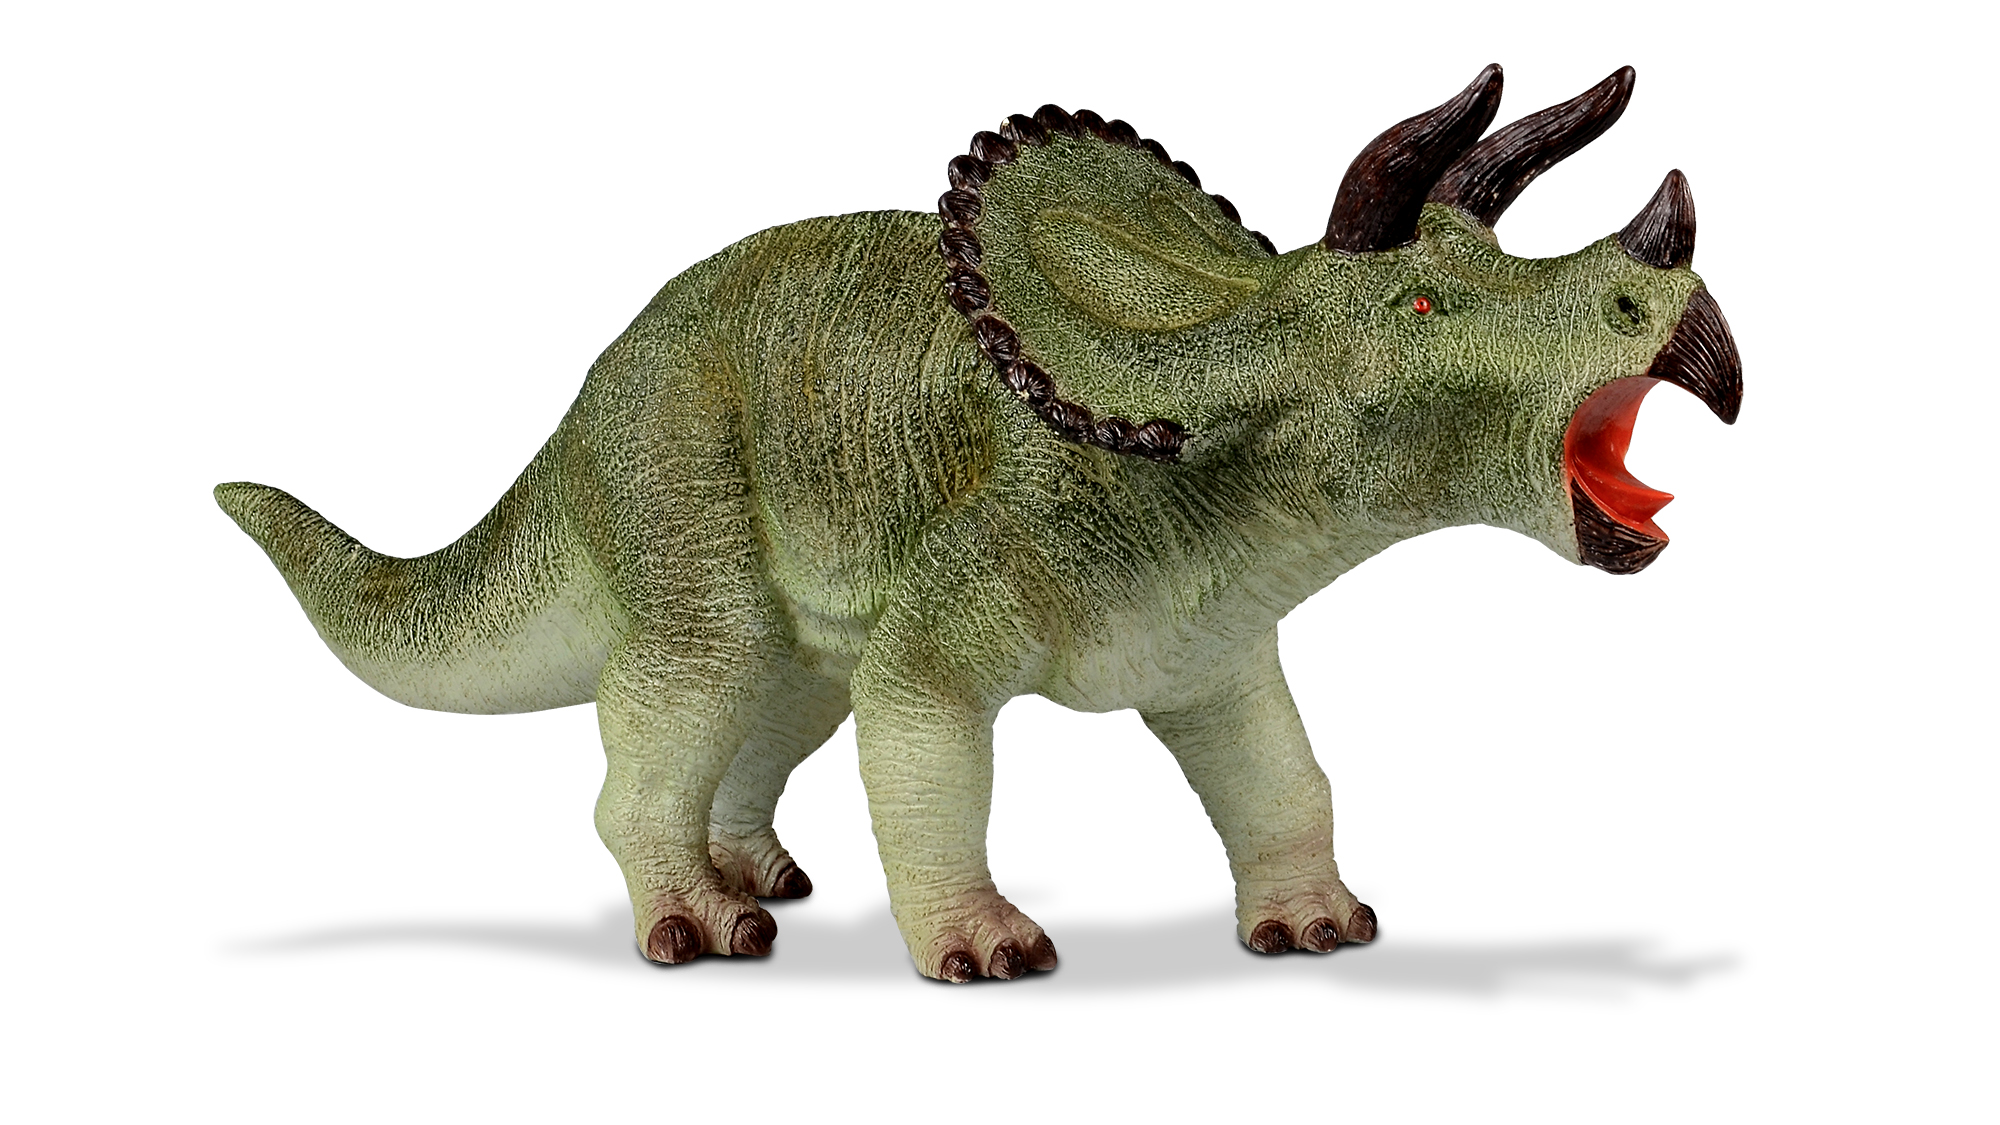 Large size dinosaur toy Triceratops toy for gift